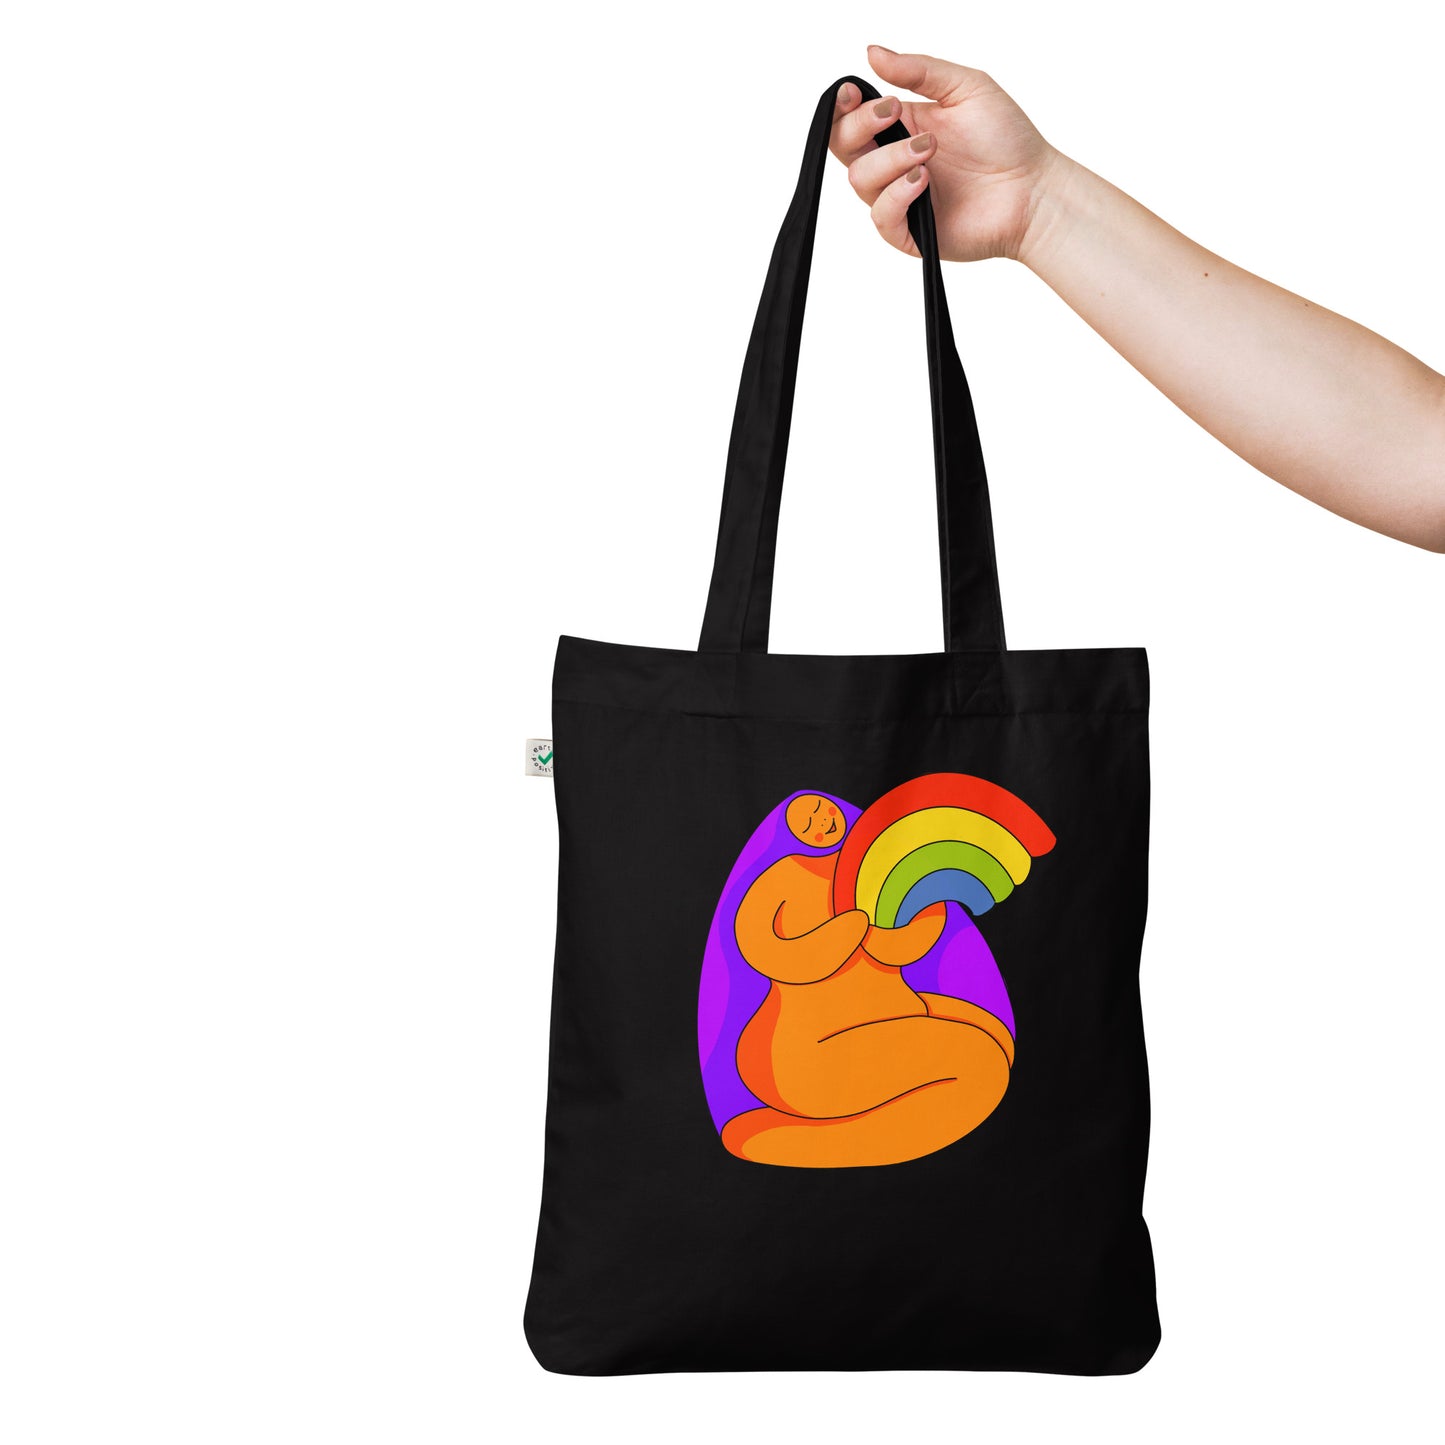 Live with Pride tote bag